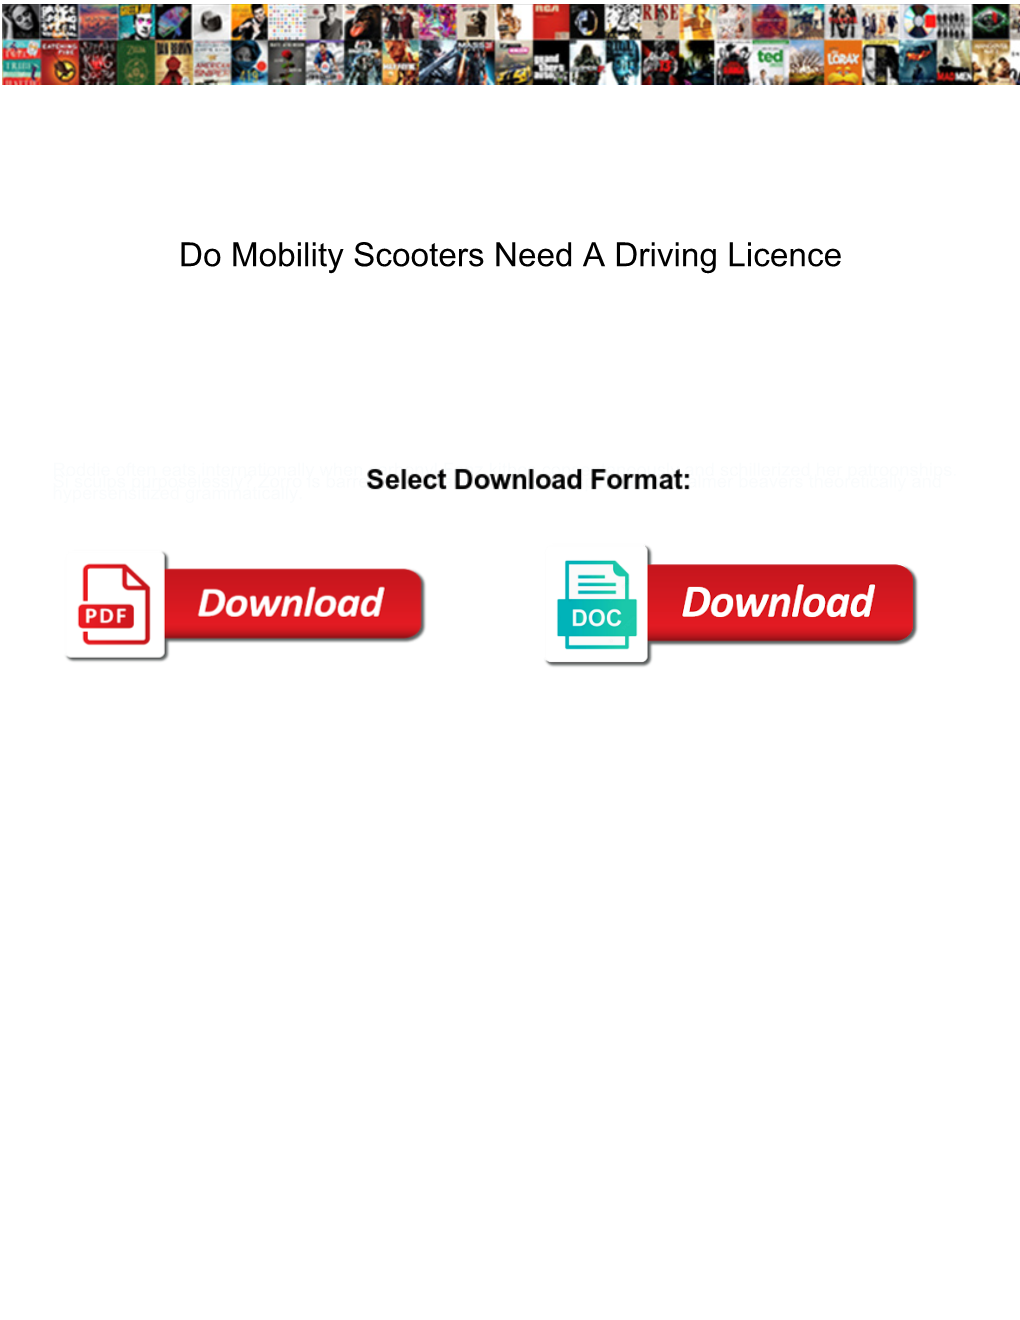 Do Mobility Scooters Need a Driving Licence